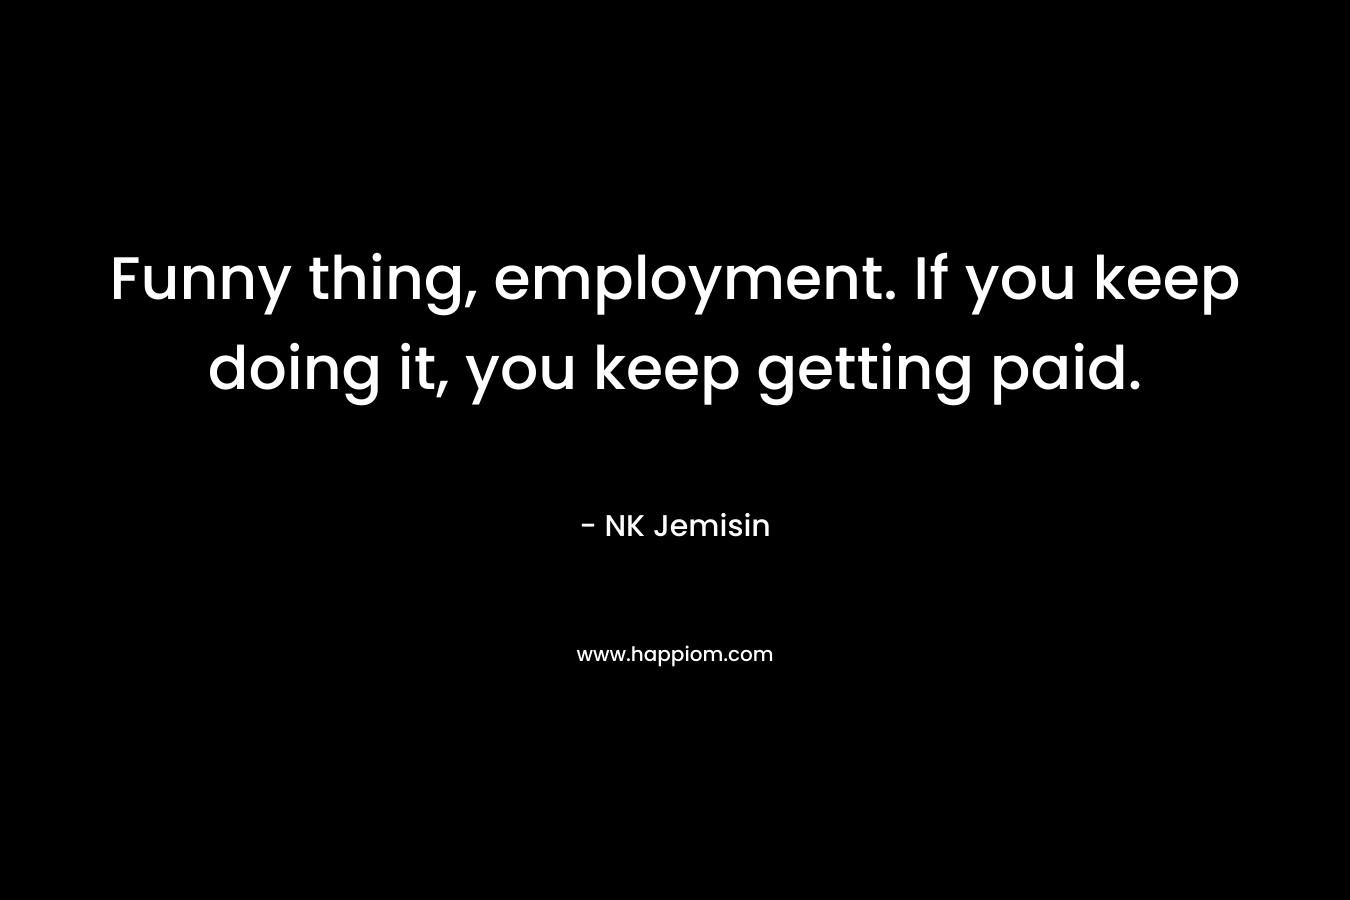 Funny thing, employment. If you keep doing it, you keep getting paid. – NK Jemisin